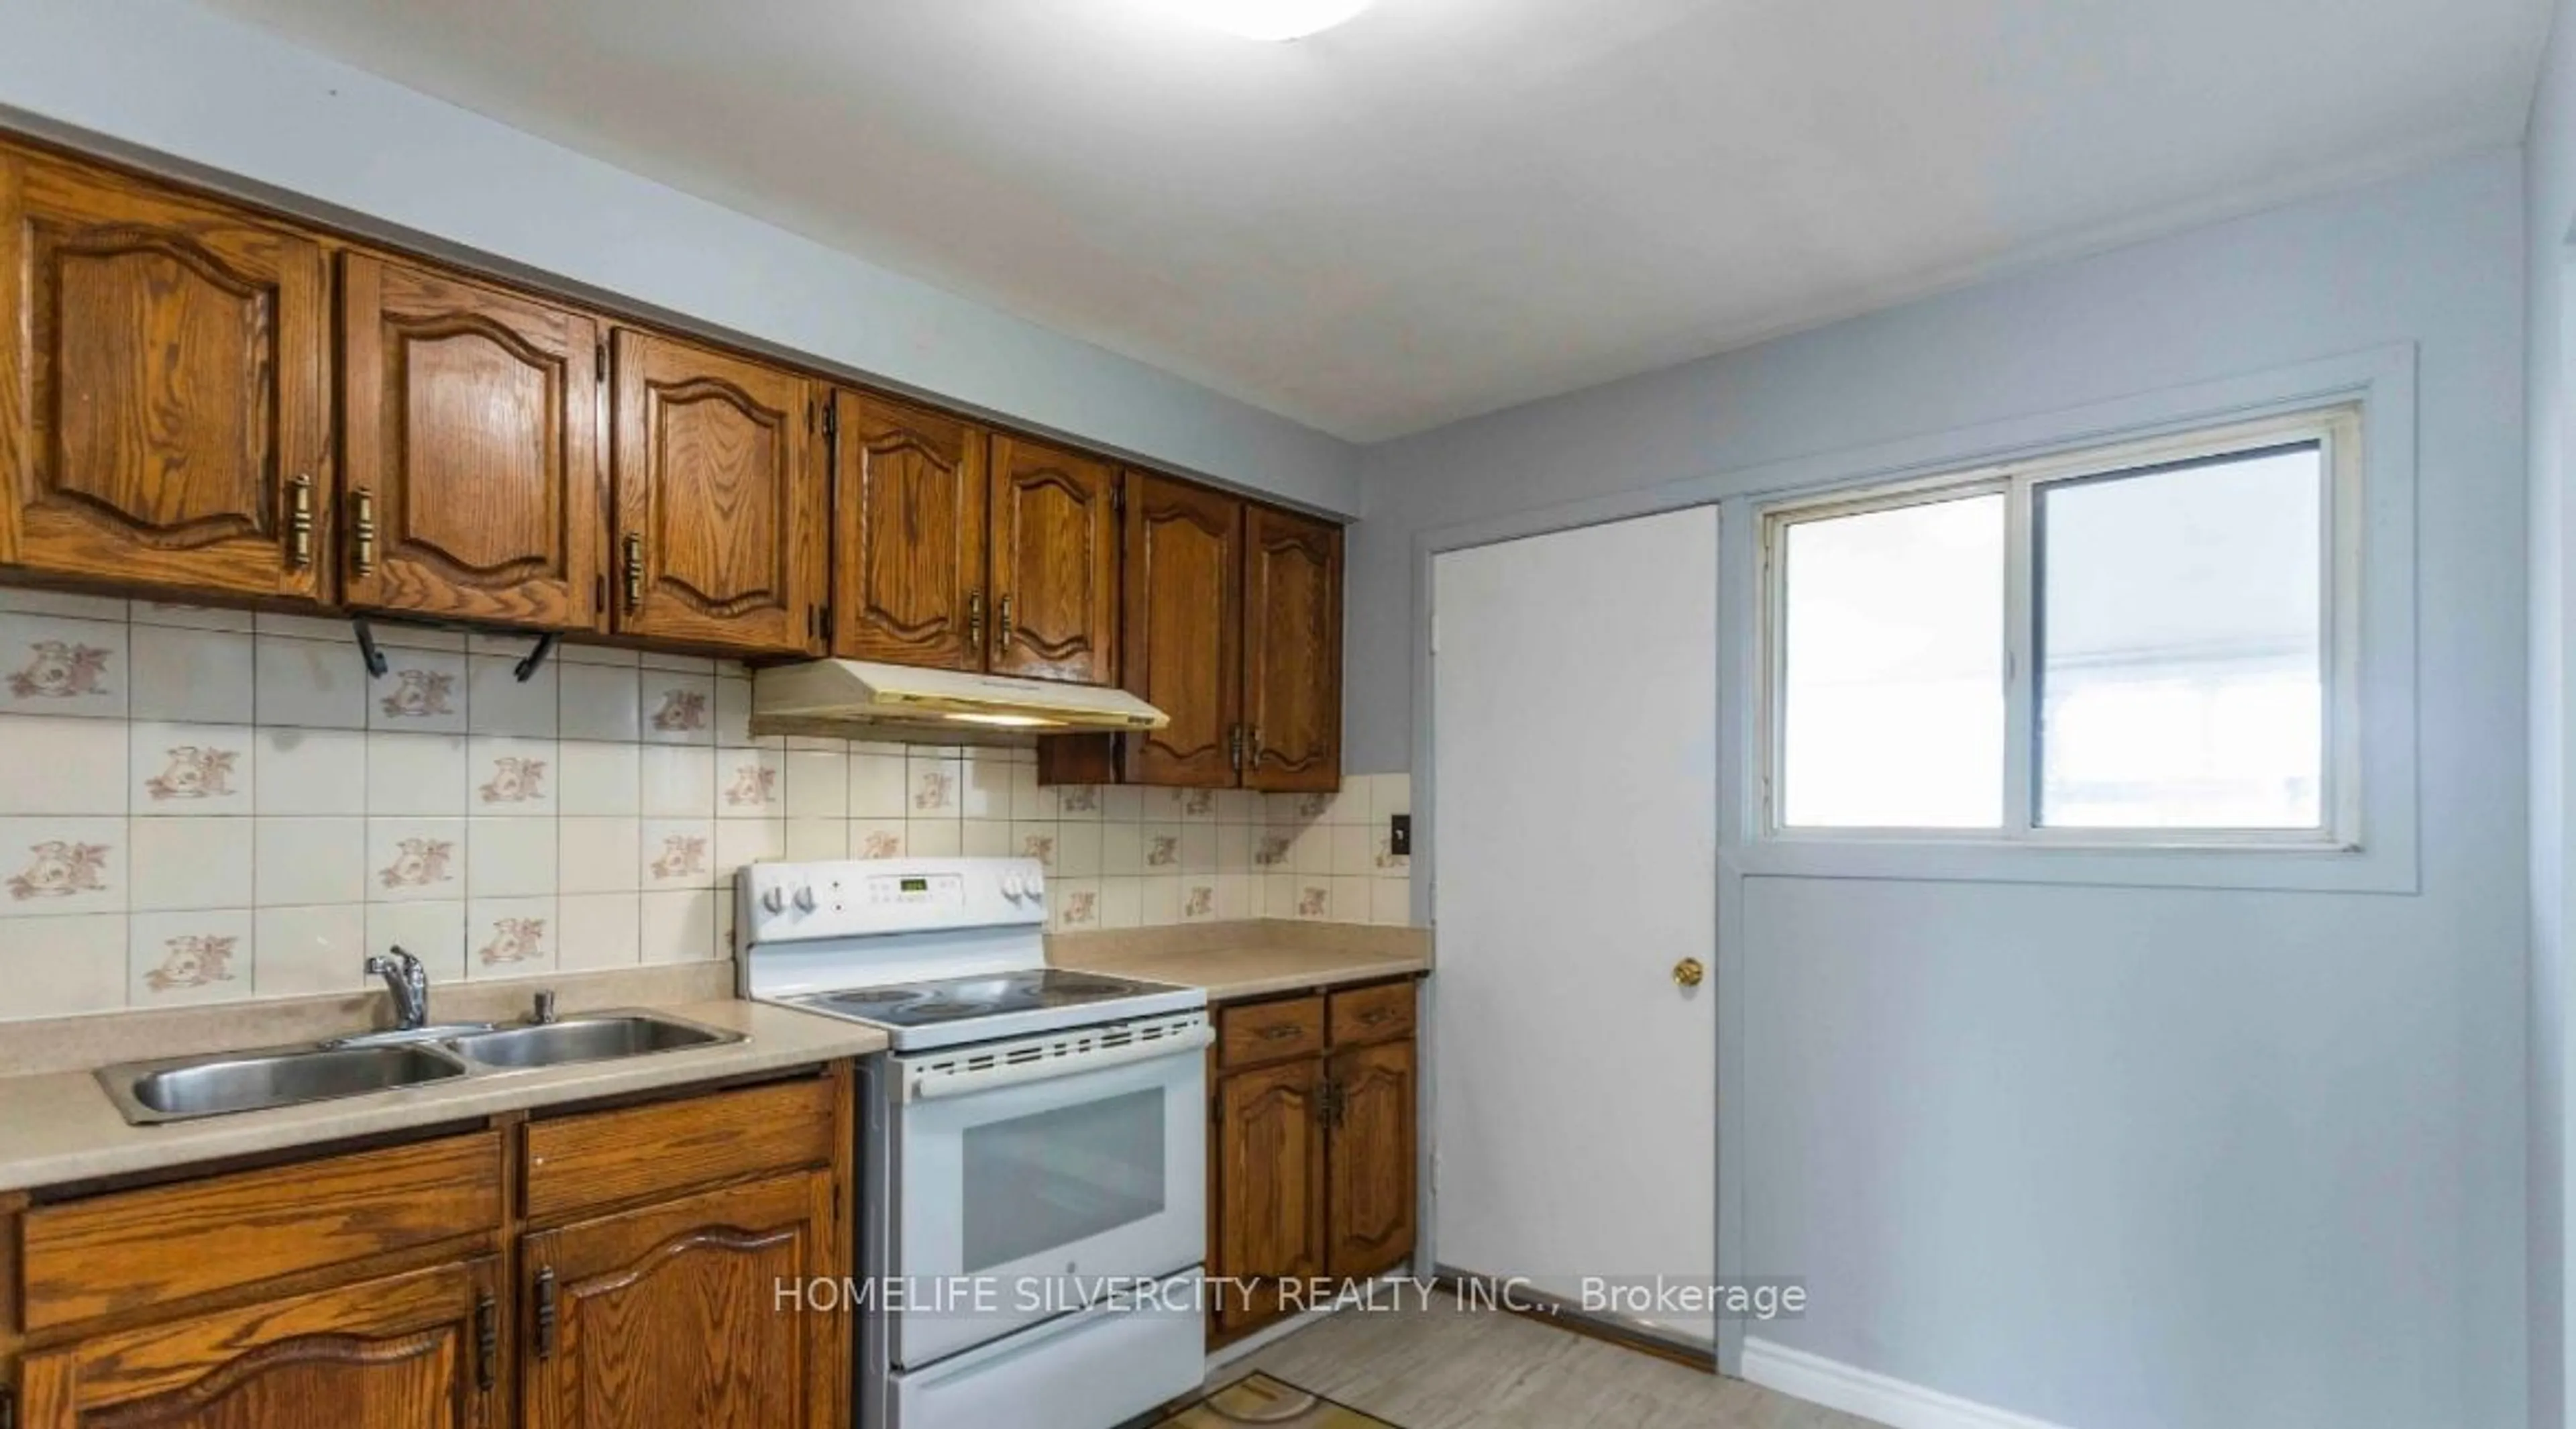 Standard kitchen for 7271 Hermitage Rd, Mississauga Ontario L4T 2S5